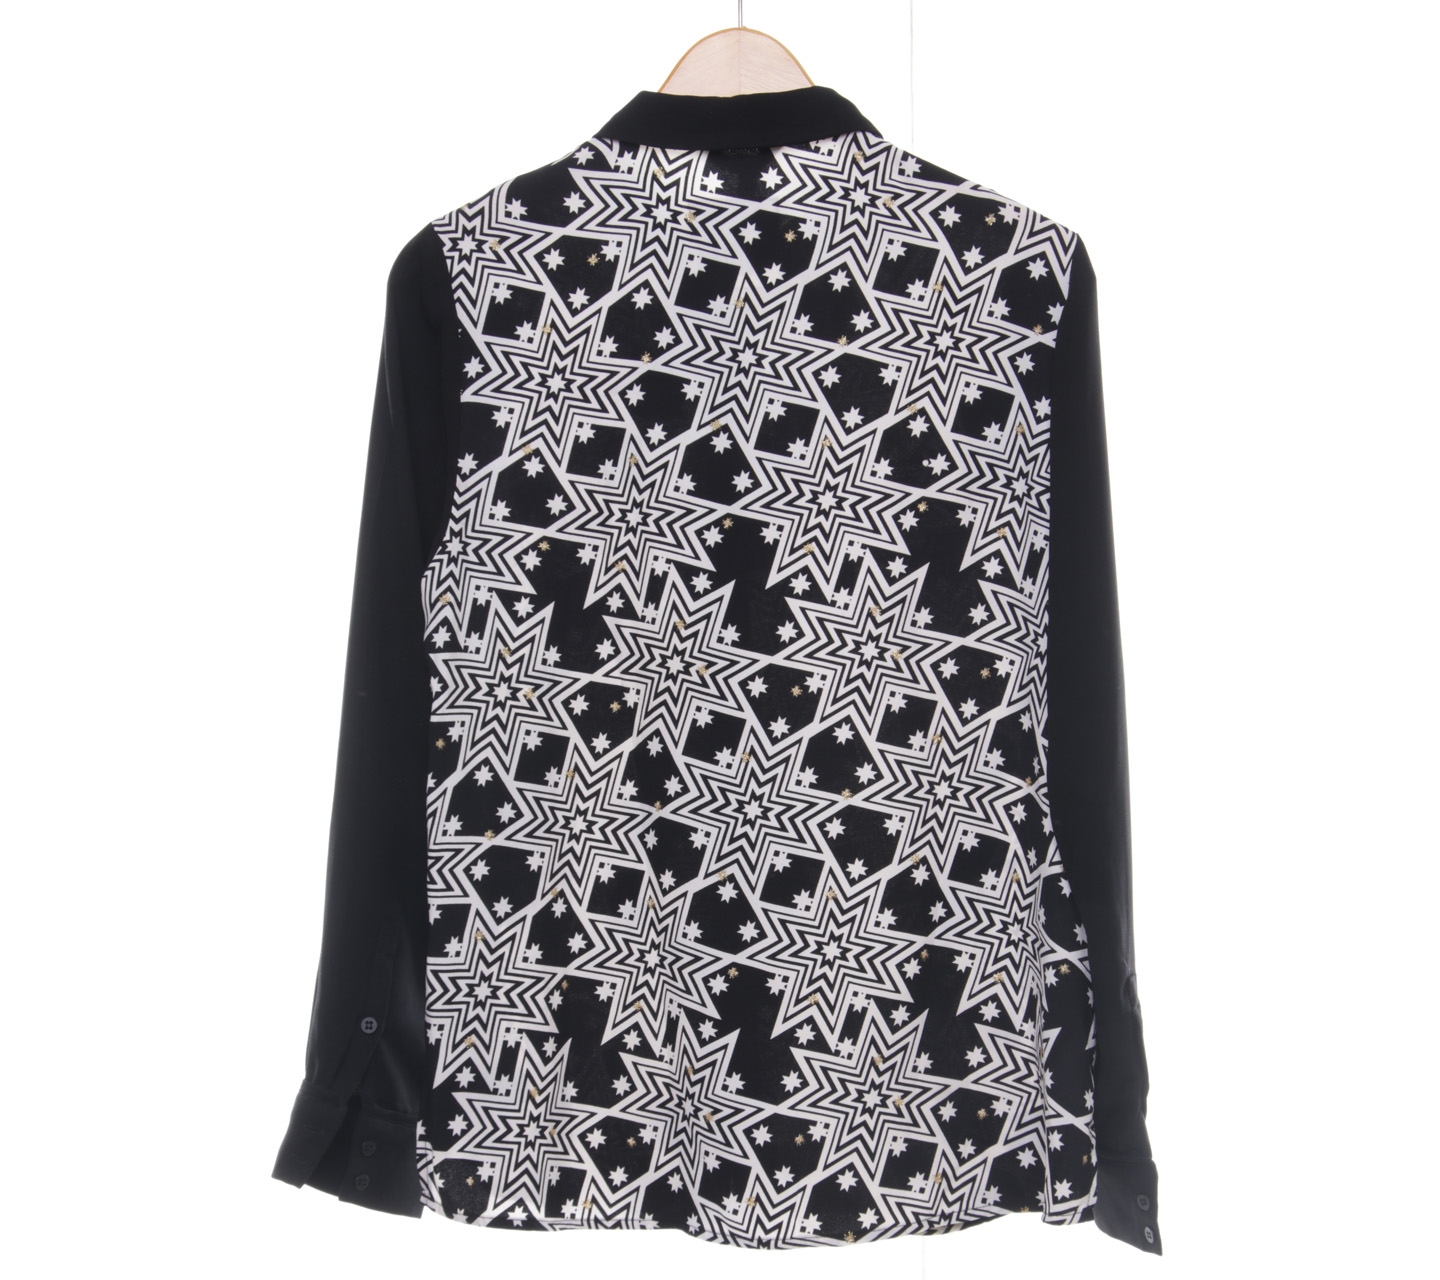 Lily Black And White Patterned Shirt